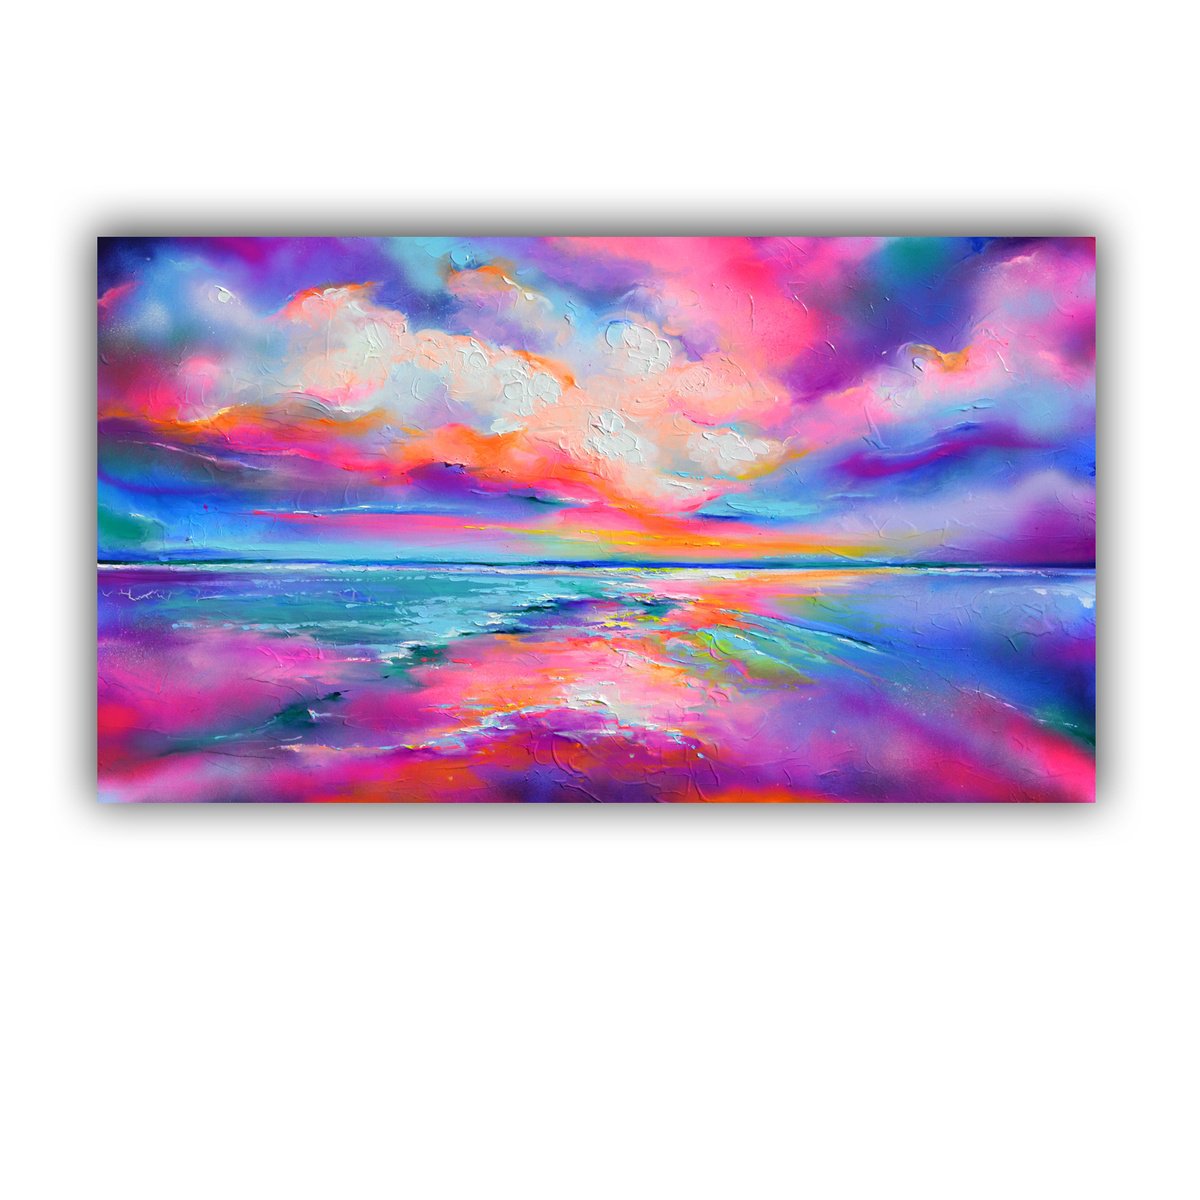 New Horizon 170 - 140x80 cm, Colourful Seascape, Sunset Painting, Impressionistic Colorful... by Soos Roxana Gabriela